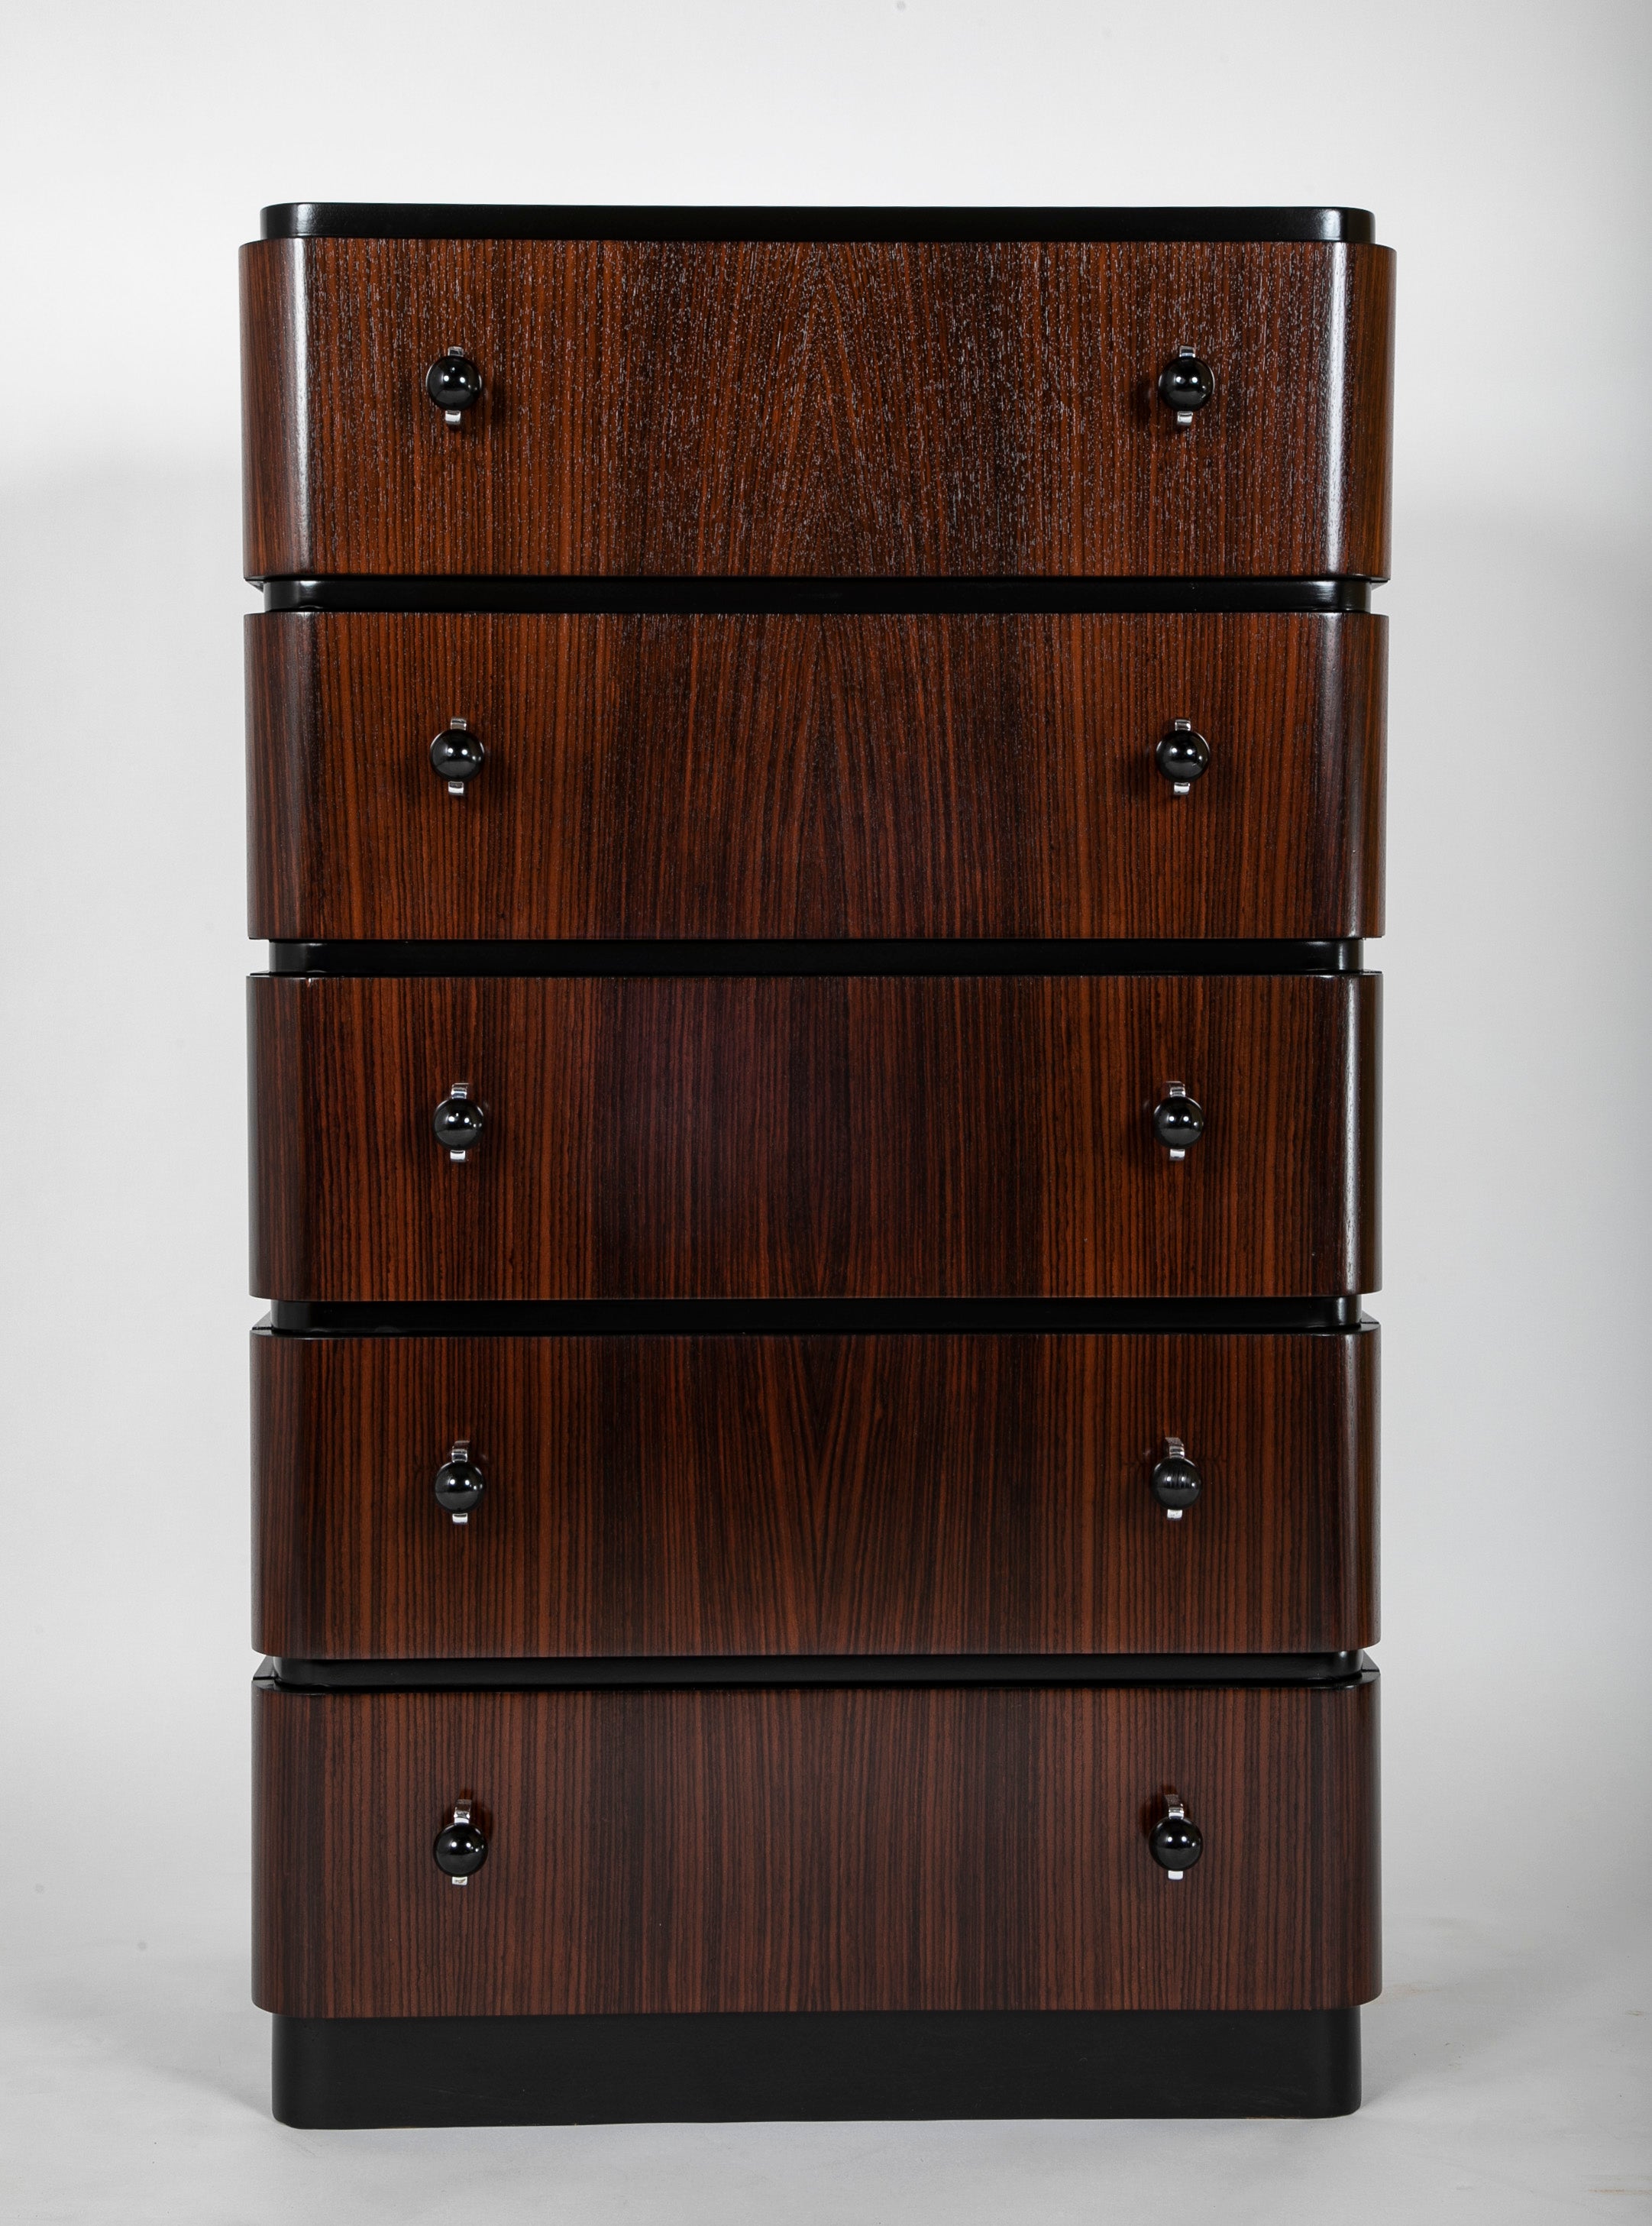 A Striking Pair of Indian Rosewood Chests of Drawers by Donald Deskey